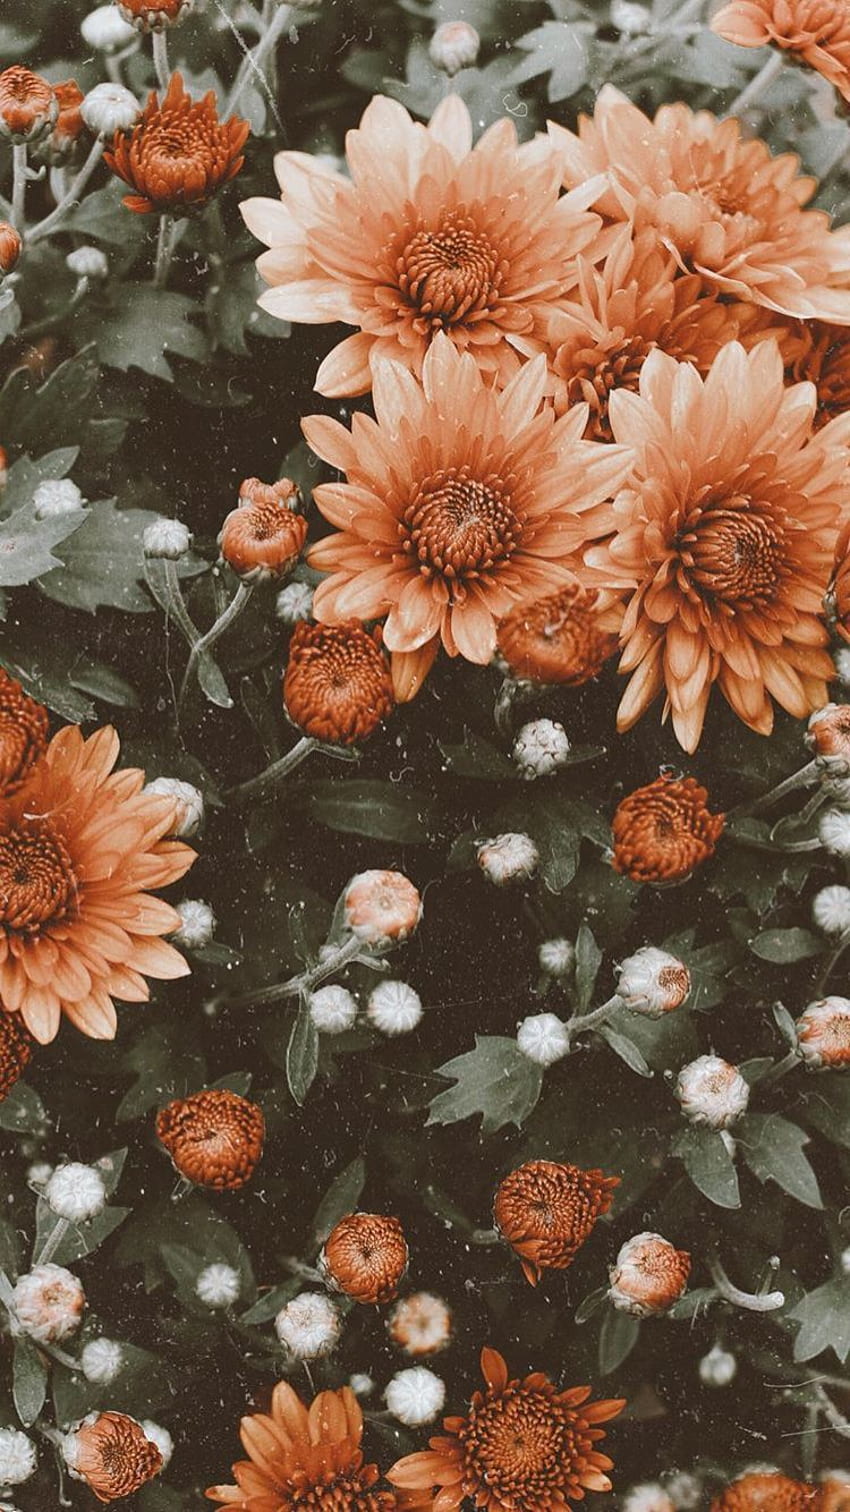 edited by kathstemplates   check out KathsTemplates on etsy   Flower  aesthetic Beautiful flowers wallpapers Marigold aesthetic wallpaper